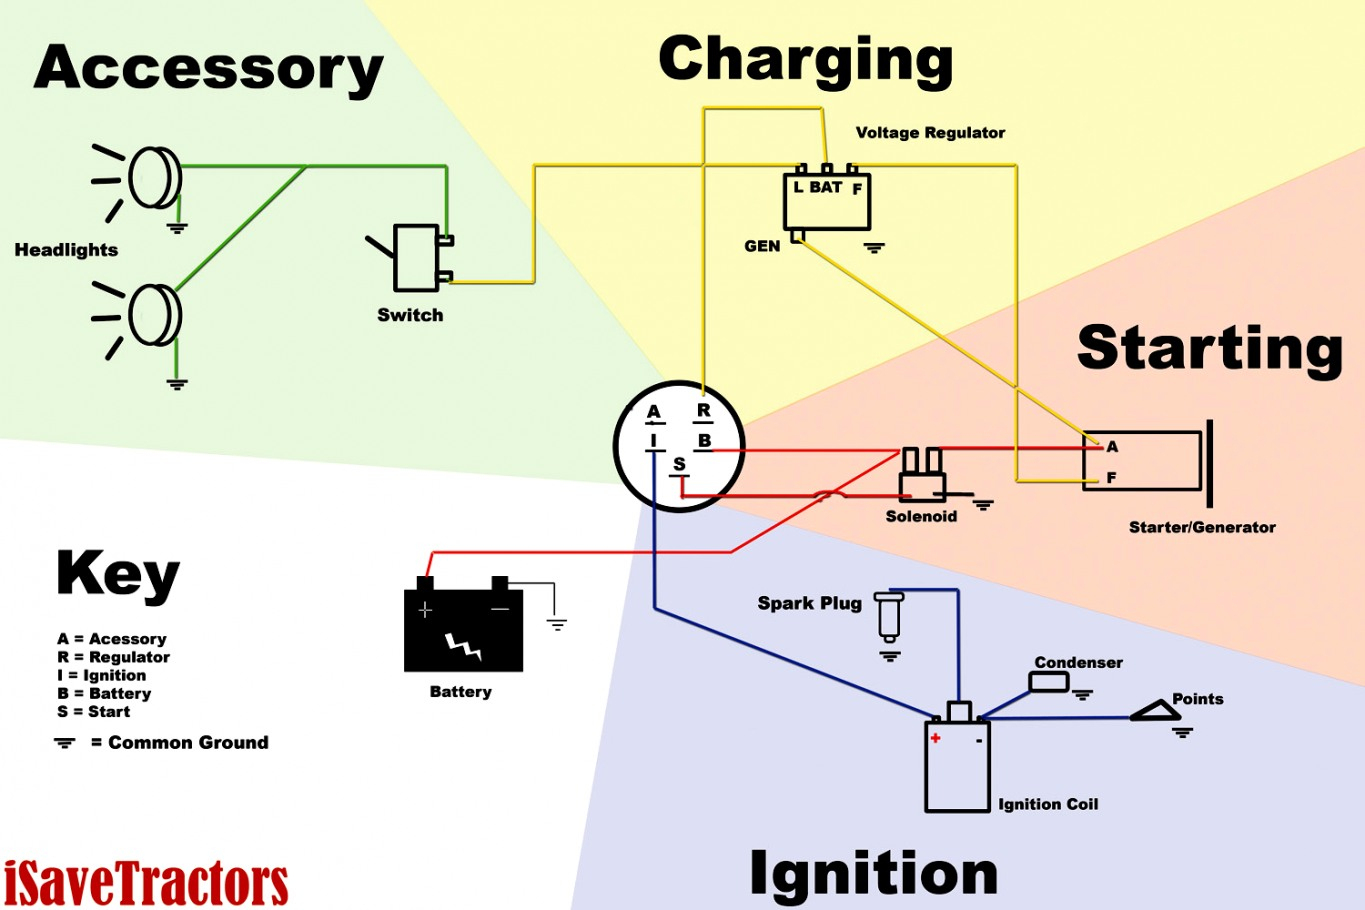 Typical Ignition Switch Wiring Diagram - Wiring Diagrams Hubs - Boat Ignition Switch Wiring Diagram